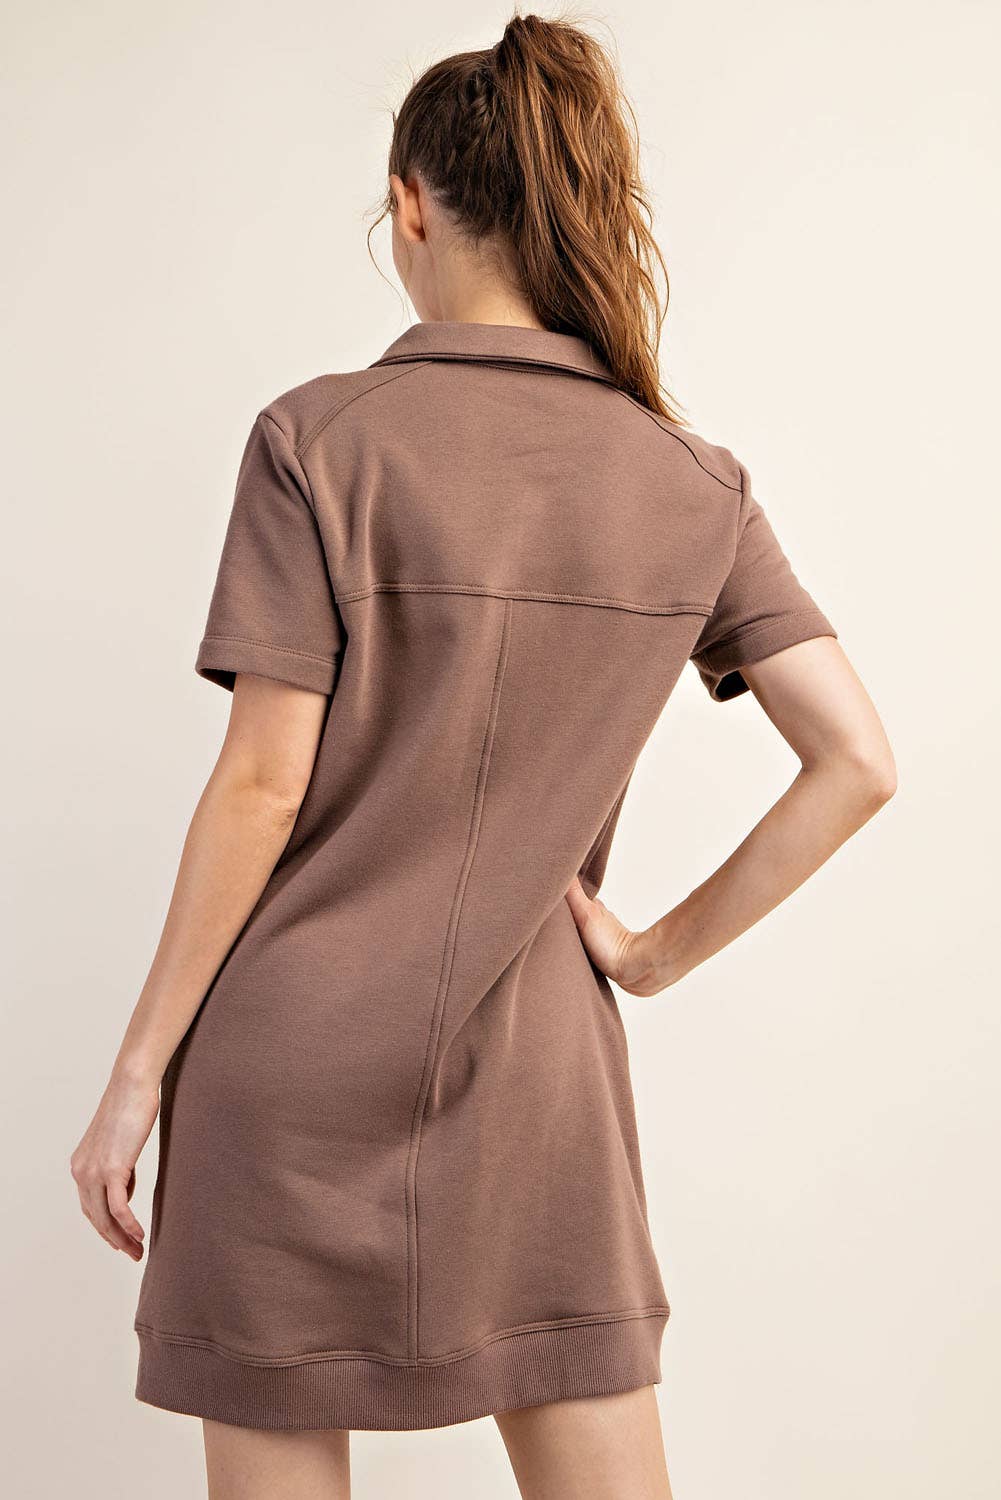 French terry 1/4 zip dress